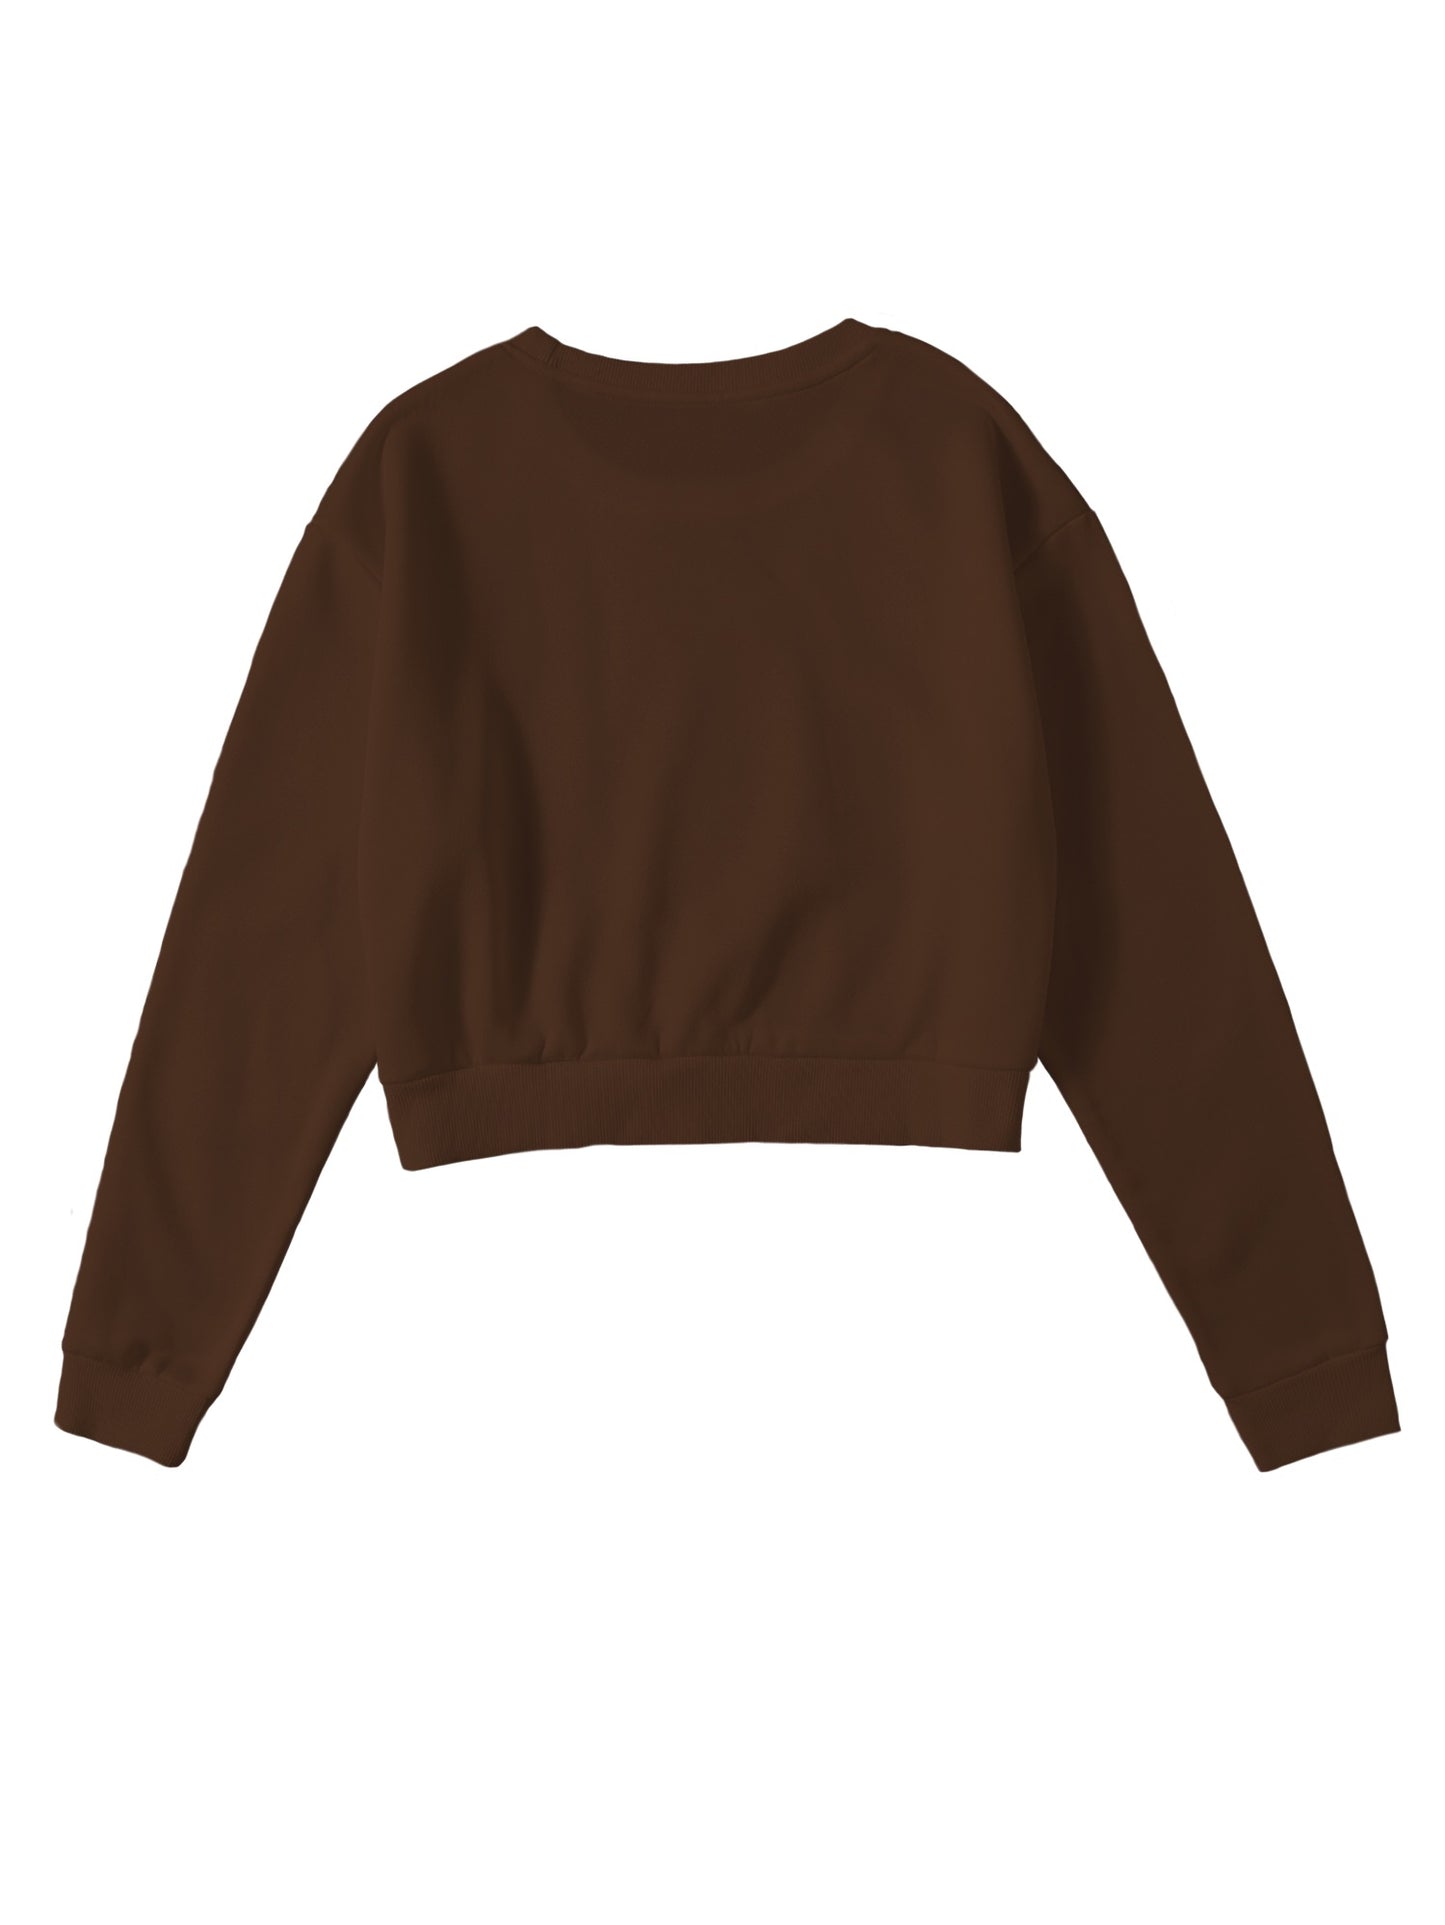 Women Chocolate Heart of the South Crewneck